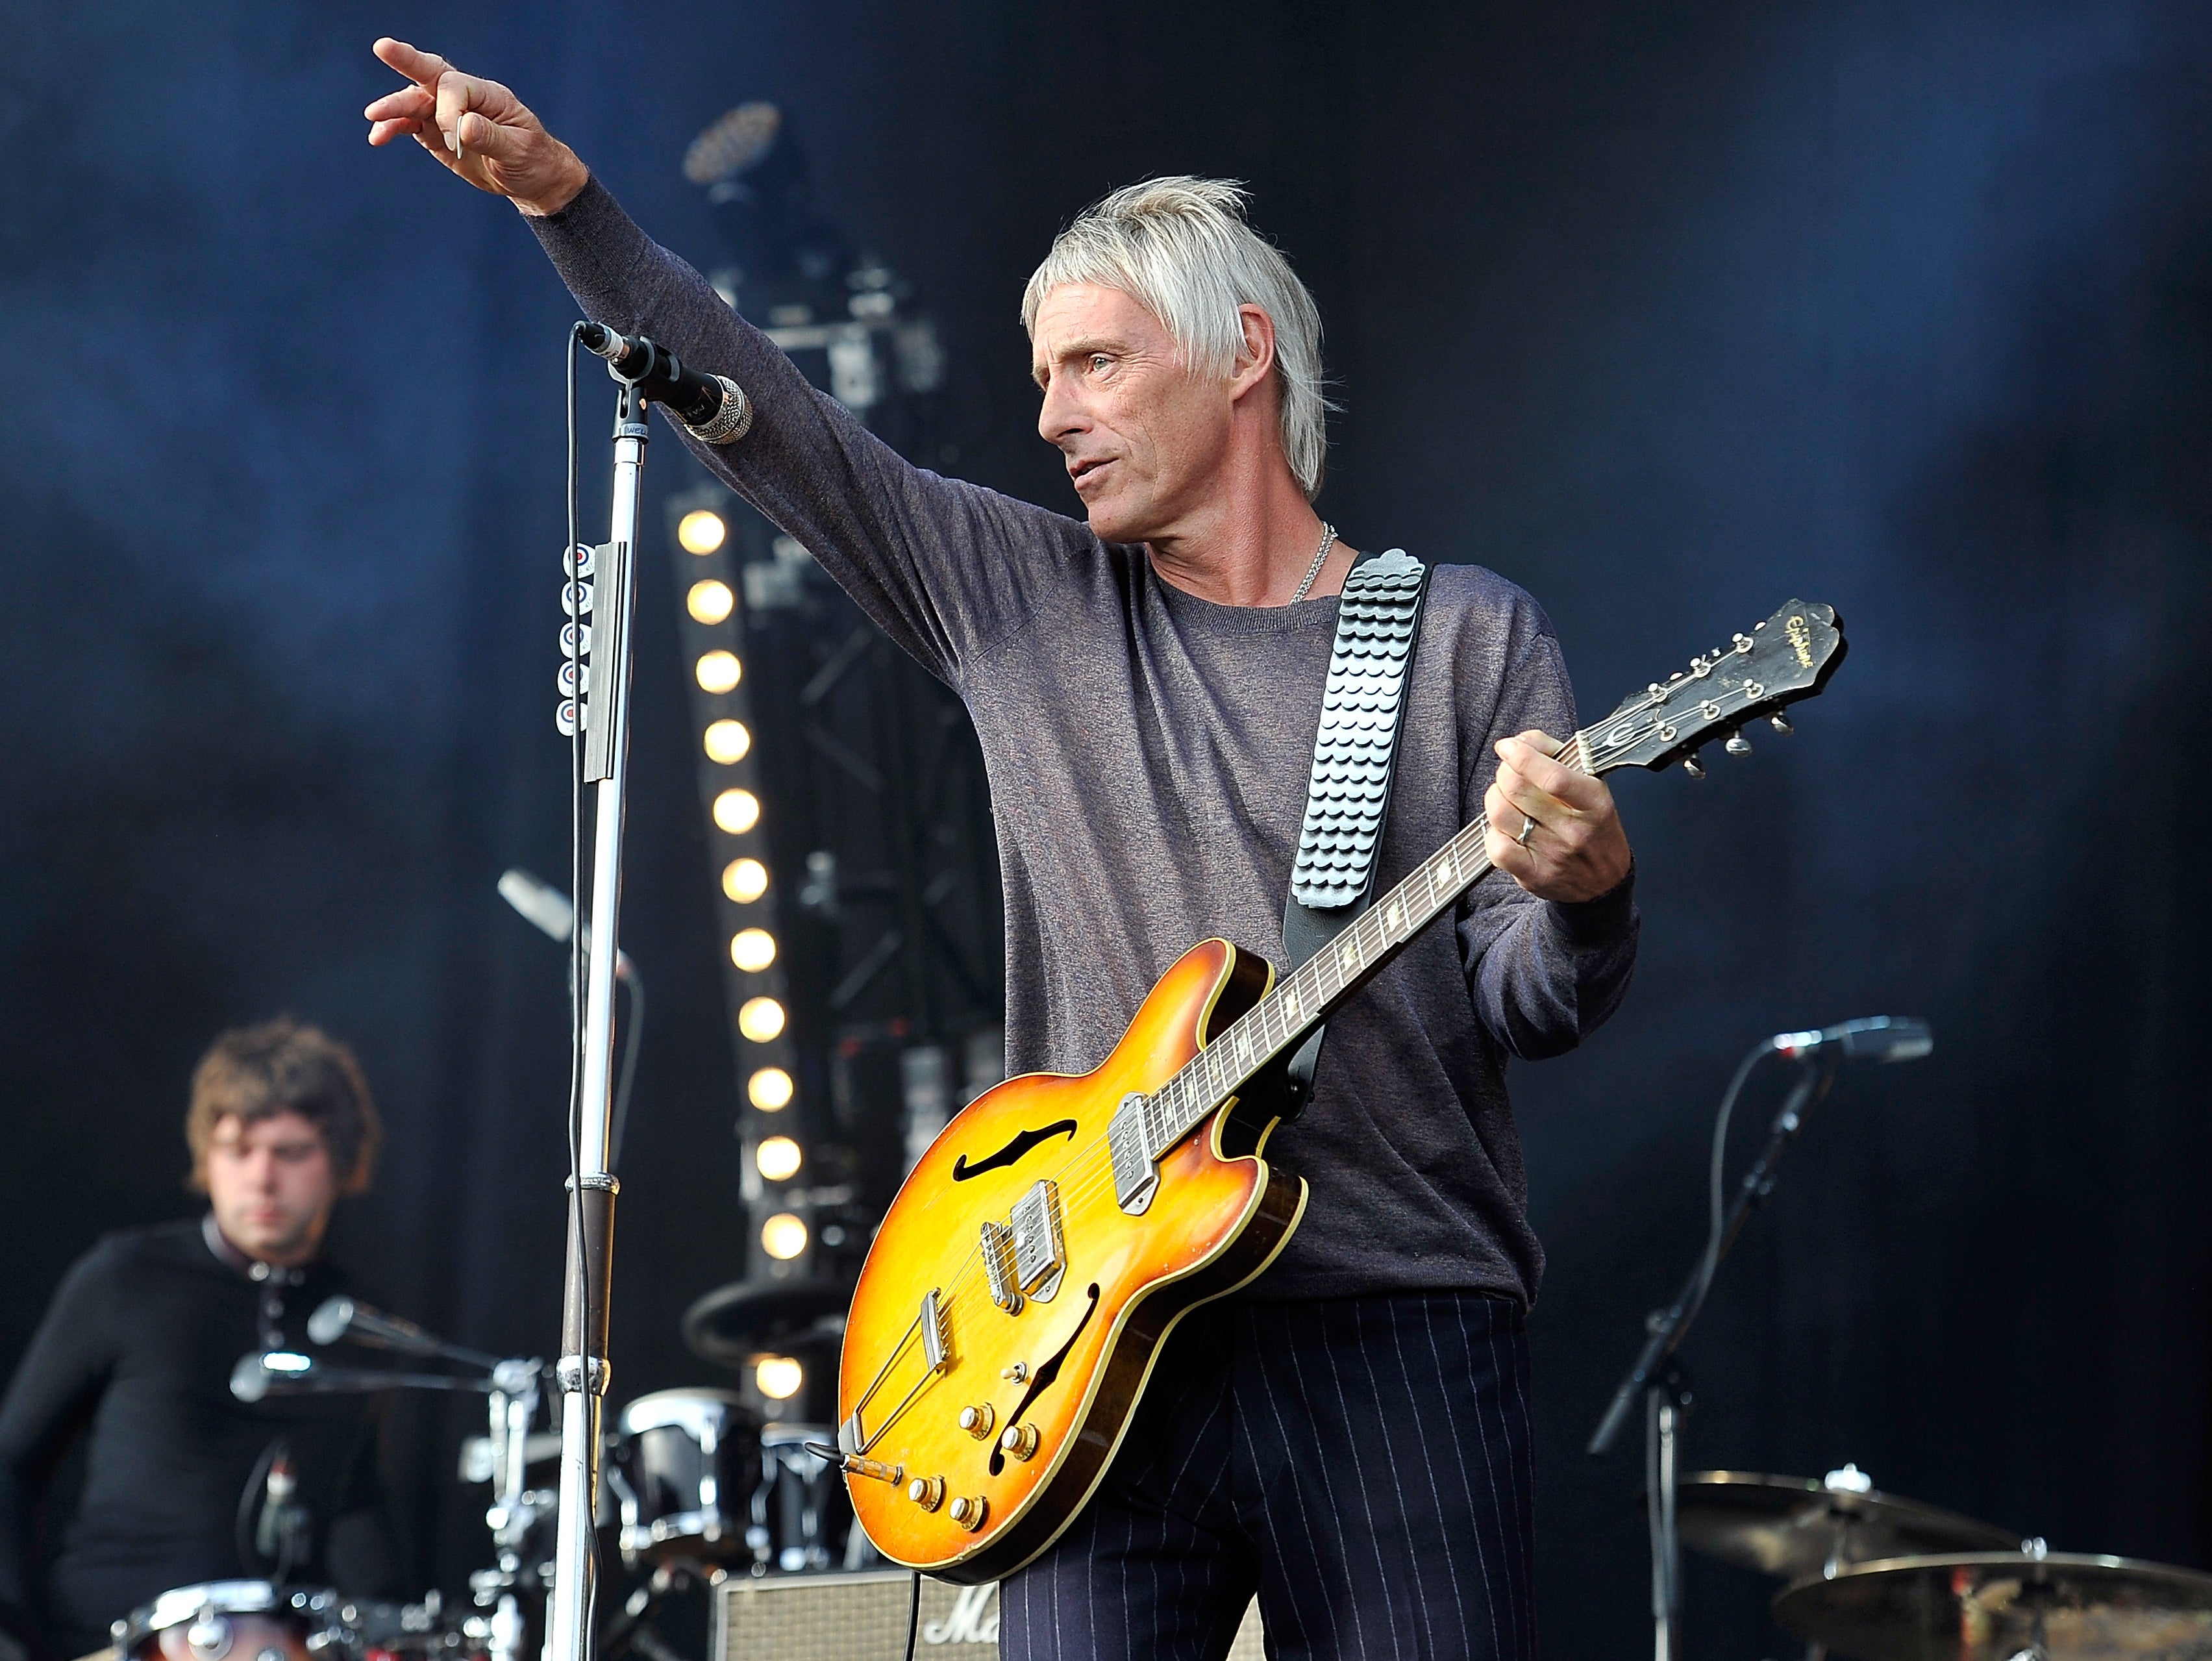 Paul Weller said ‘we should be ashamed of ourselves’ over plight of Palestinians